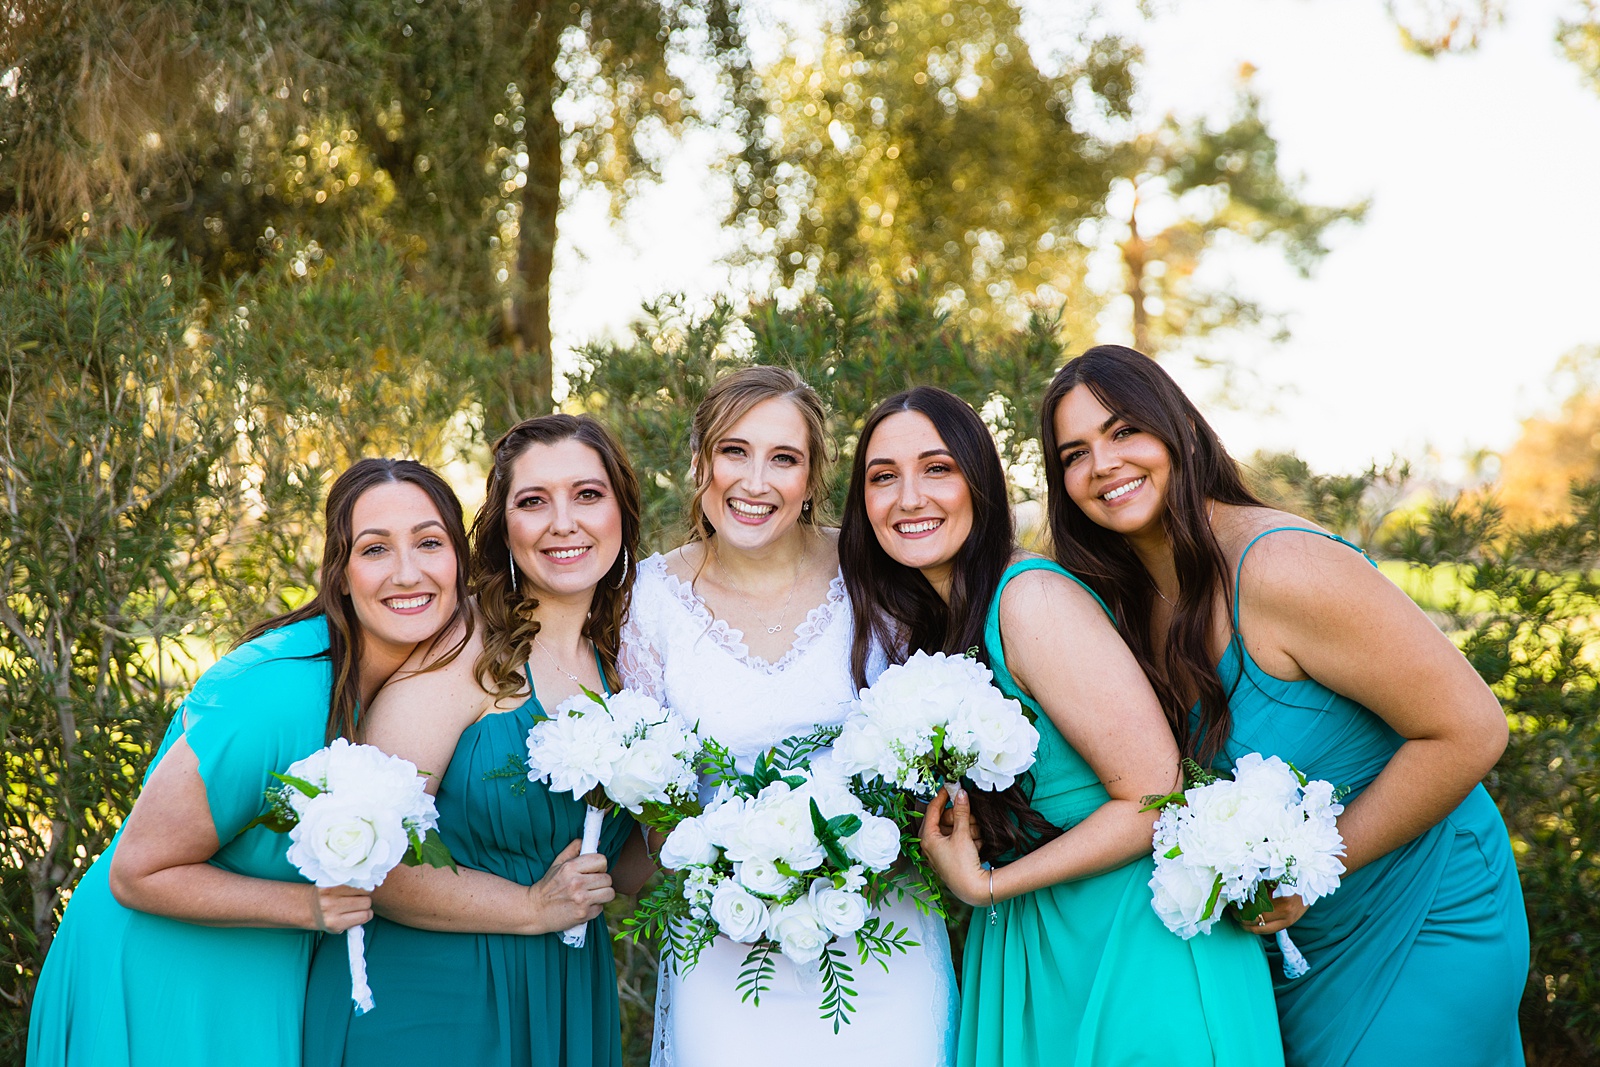 Bride and bridesmaids together at a Ocotillo Oasis wedding by Arizona wedding photographer PMA Photography.